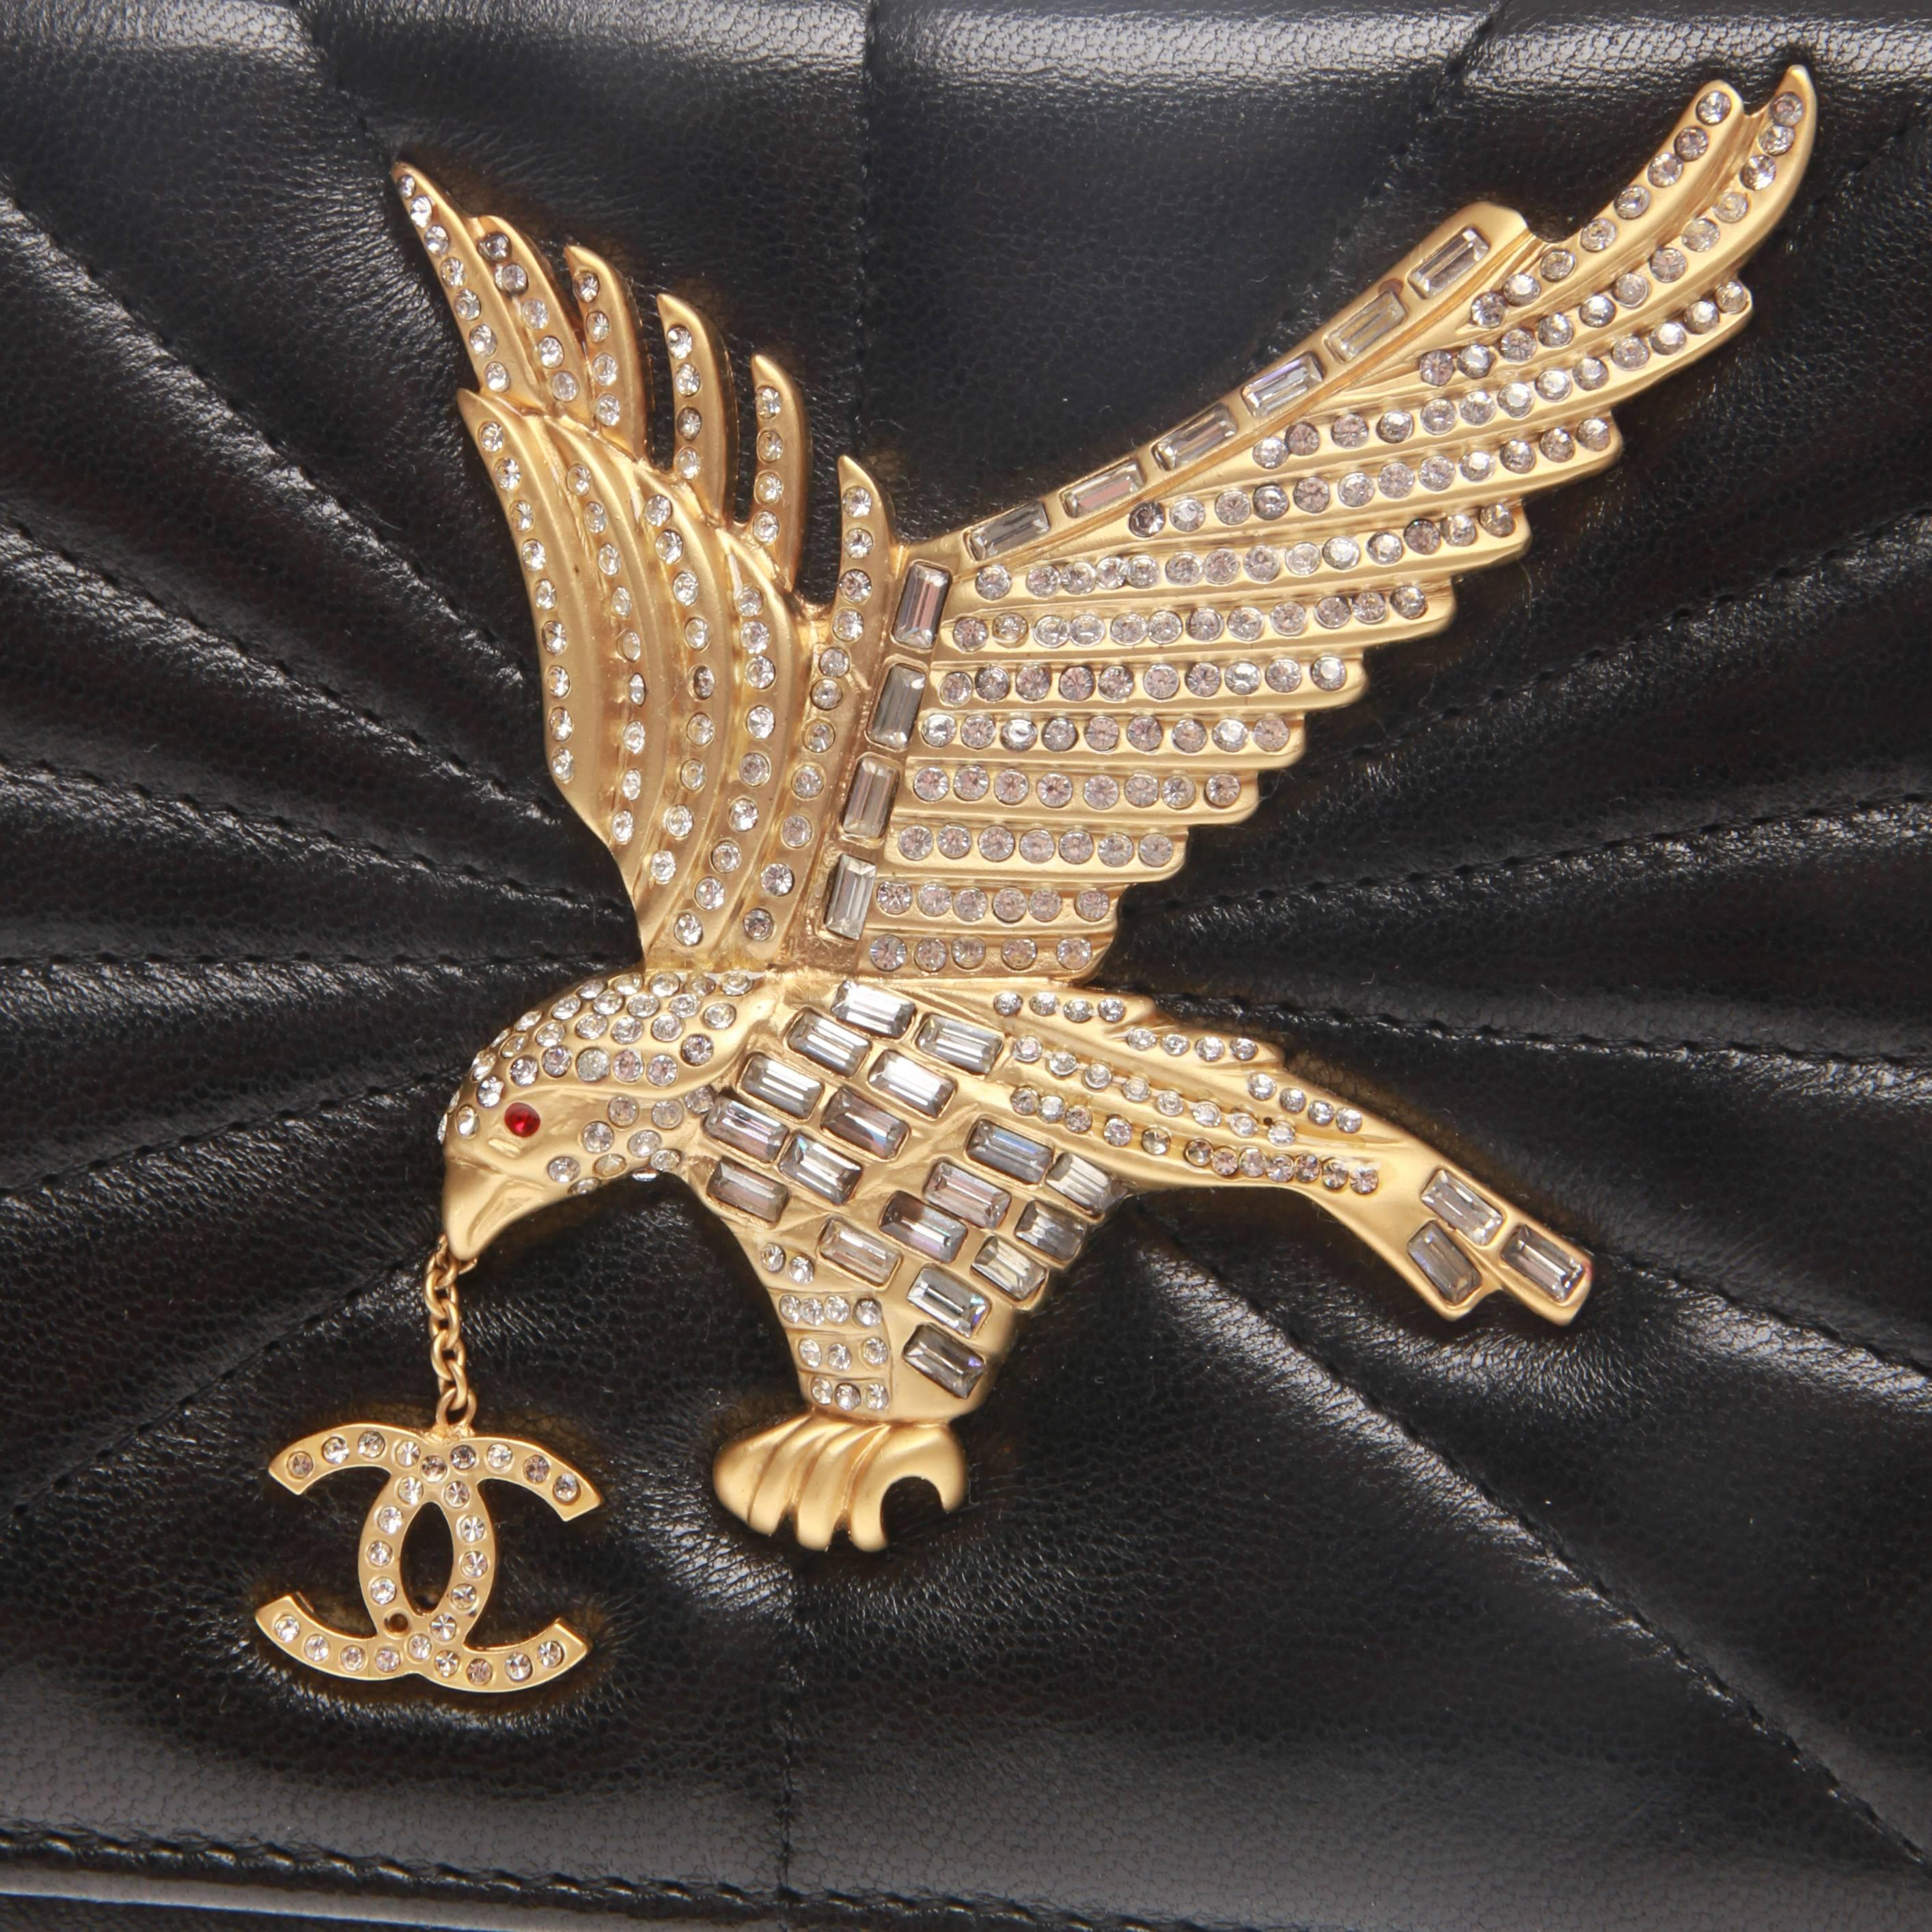 Chanel Vintage Gold Crystal Eagle Dangle CC Brooch Leather Cocktail Clutch

A fabulous black Chanel quilted leather clutch with gold-tone hardware, eagle and CC embellishment crystals by CHANEL.
It features interior zipped wall pocket, interior slip